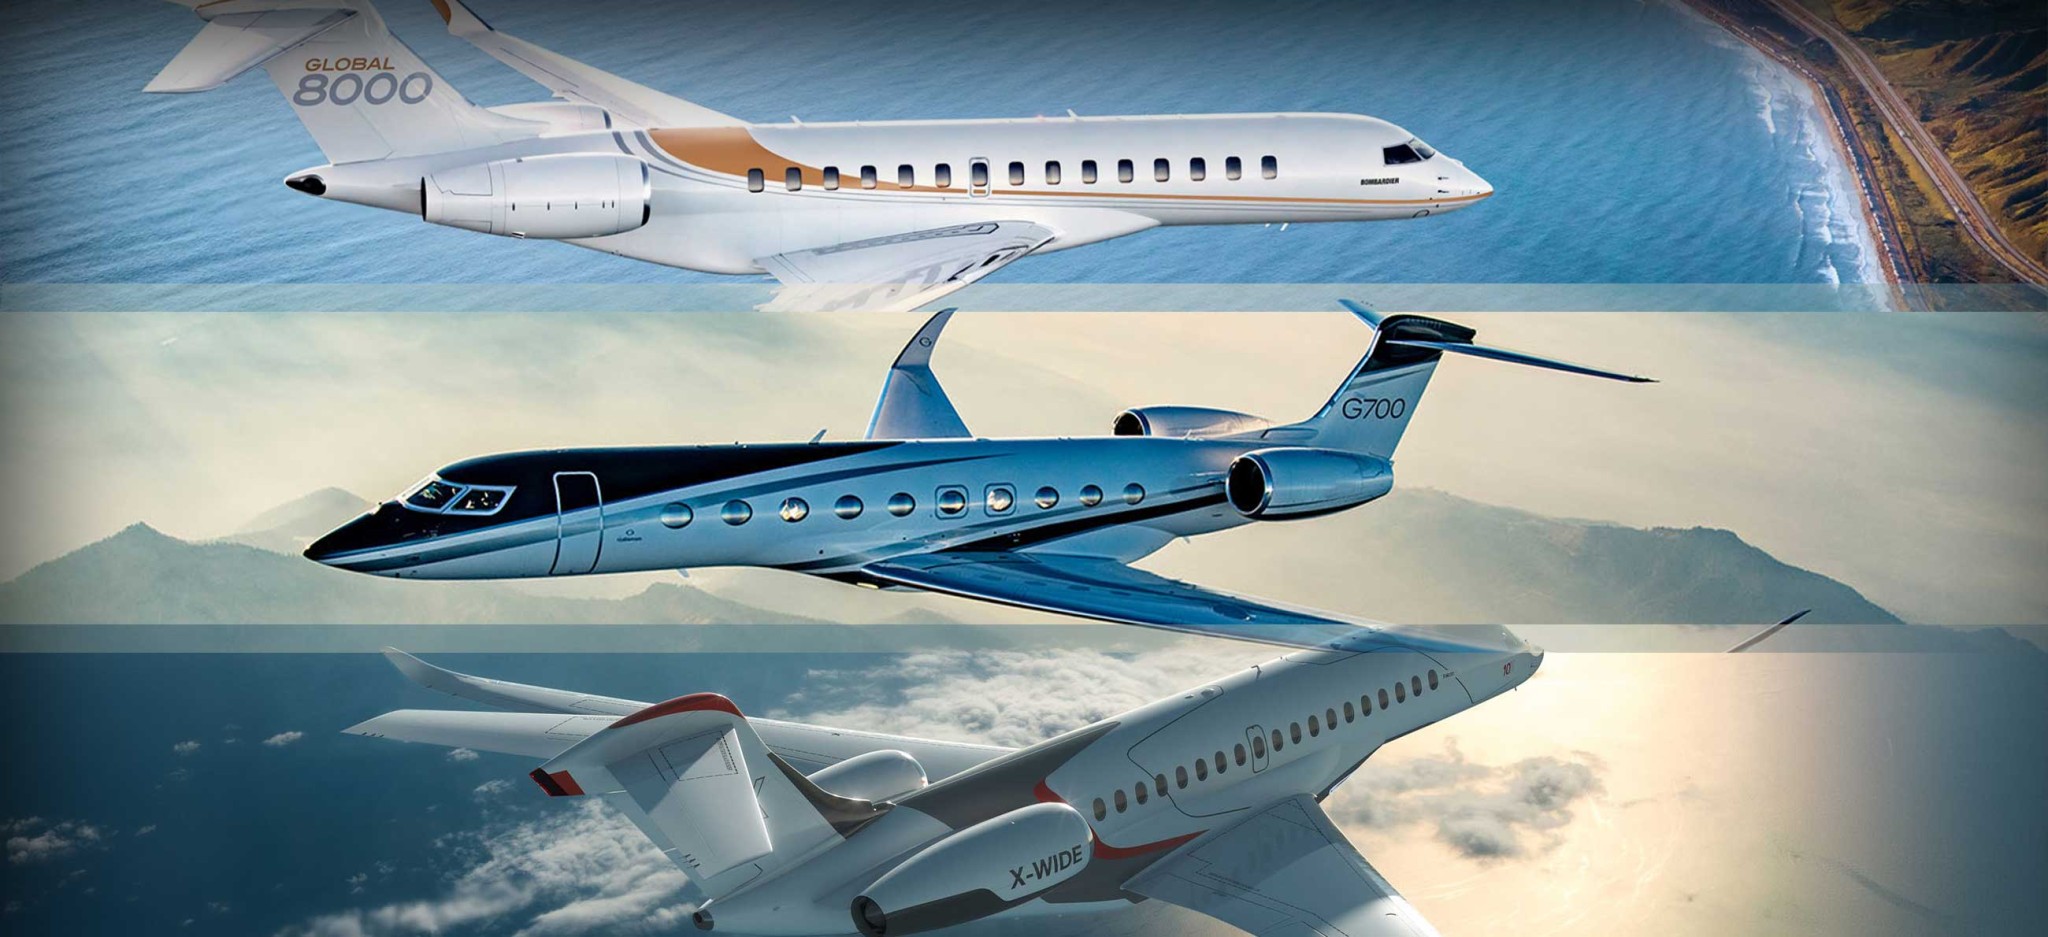 Sky Titans: Comparing the Global 8000, Gulfstream G700, and Falcon 10X